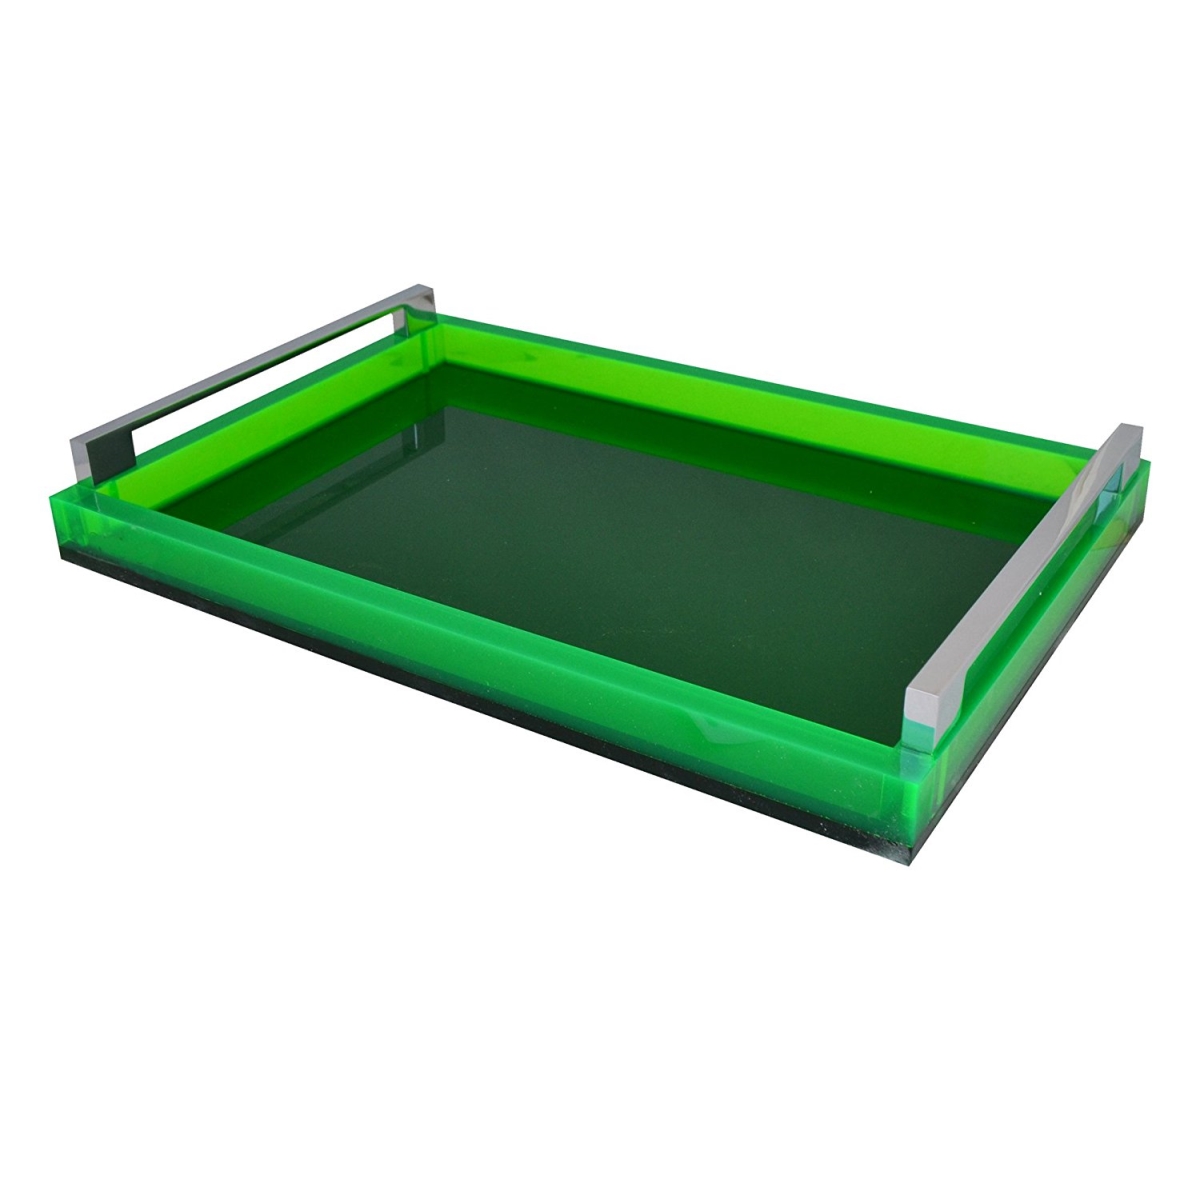 Lth01-g Tray With Silver Handles, Neon Green